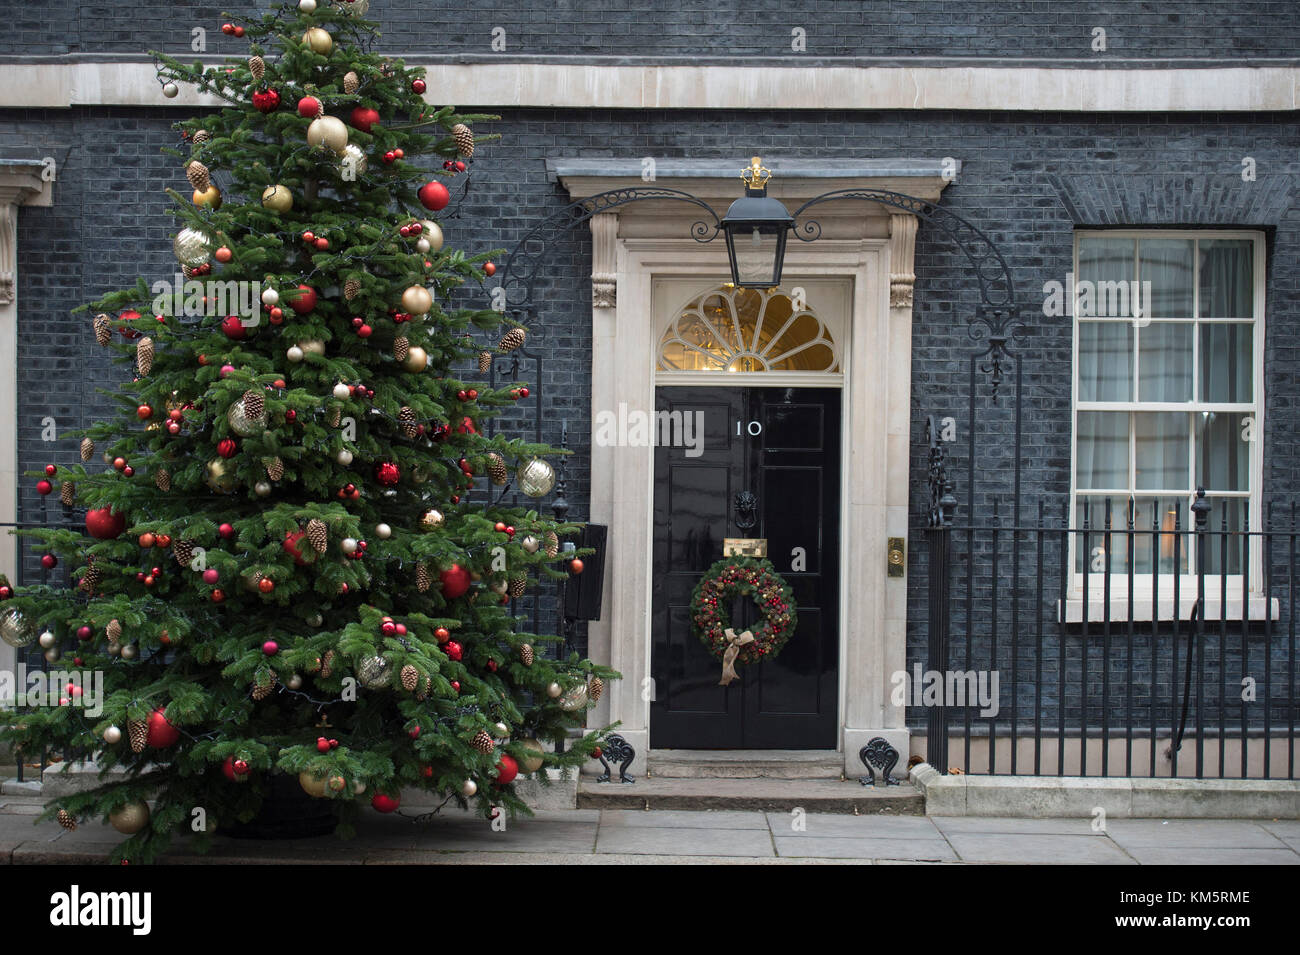 Downing Street, London, UK. 5 December 2017. Government ministers in Downing Street for weekly cabinet meeting on the day after PM Theresa May returns from failed Brexit talks in Brussels. Photo: Christmas tree and festive wreath at No 10. Credit: Malcolm Park/Alamy Live News. Stock Photo